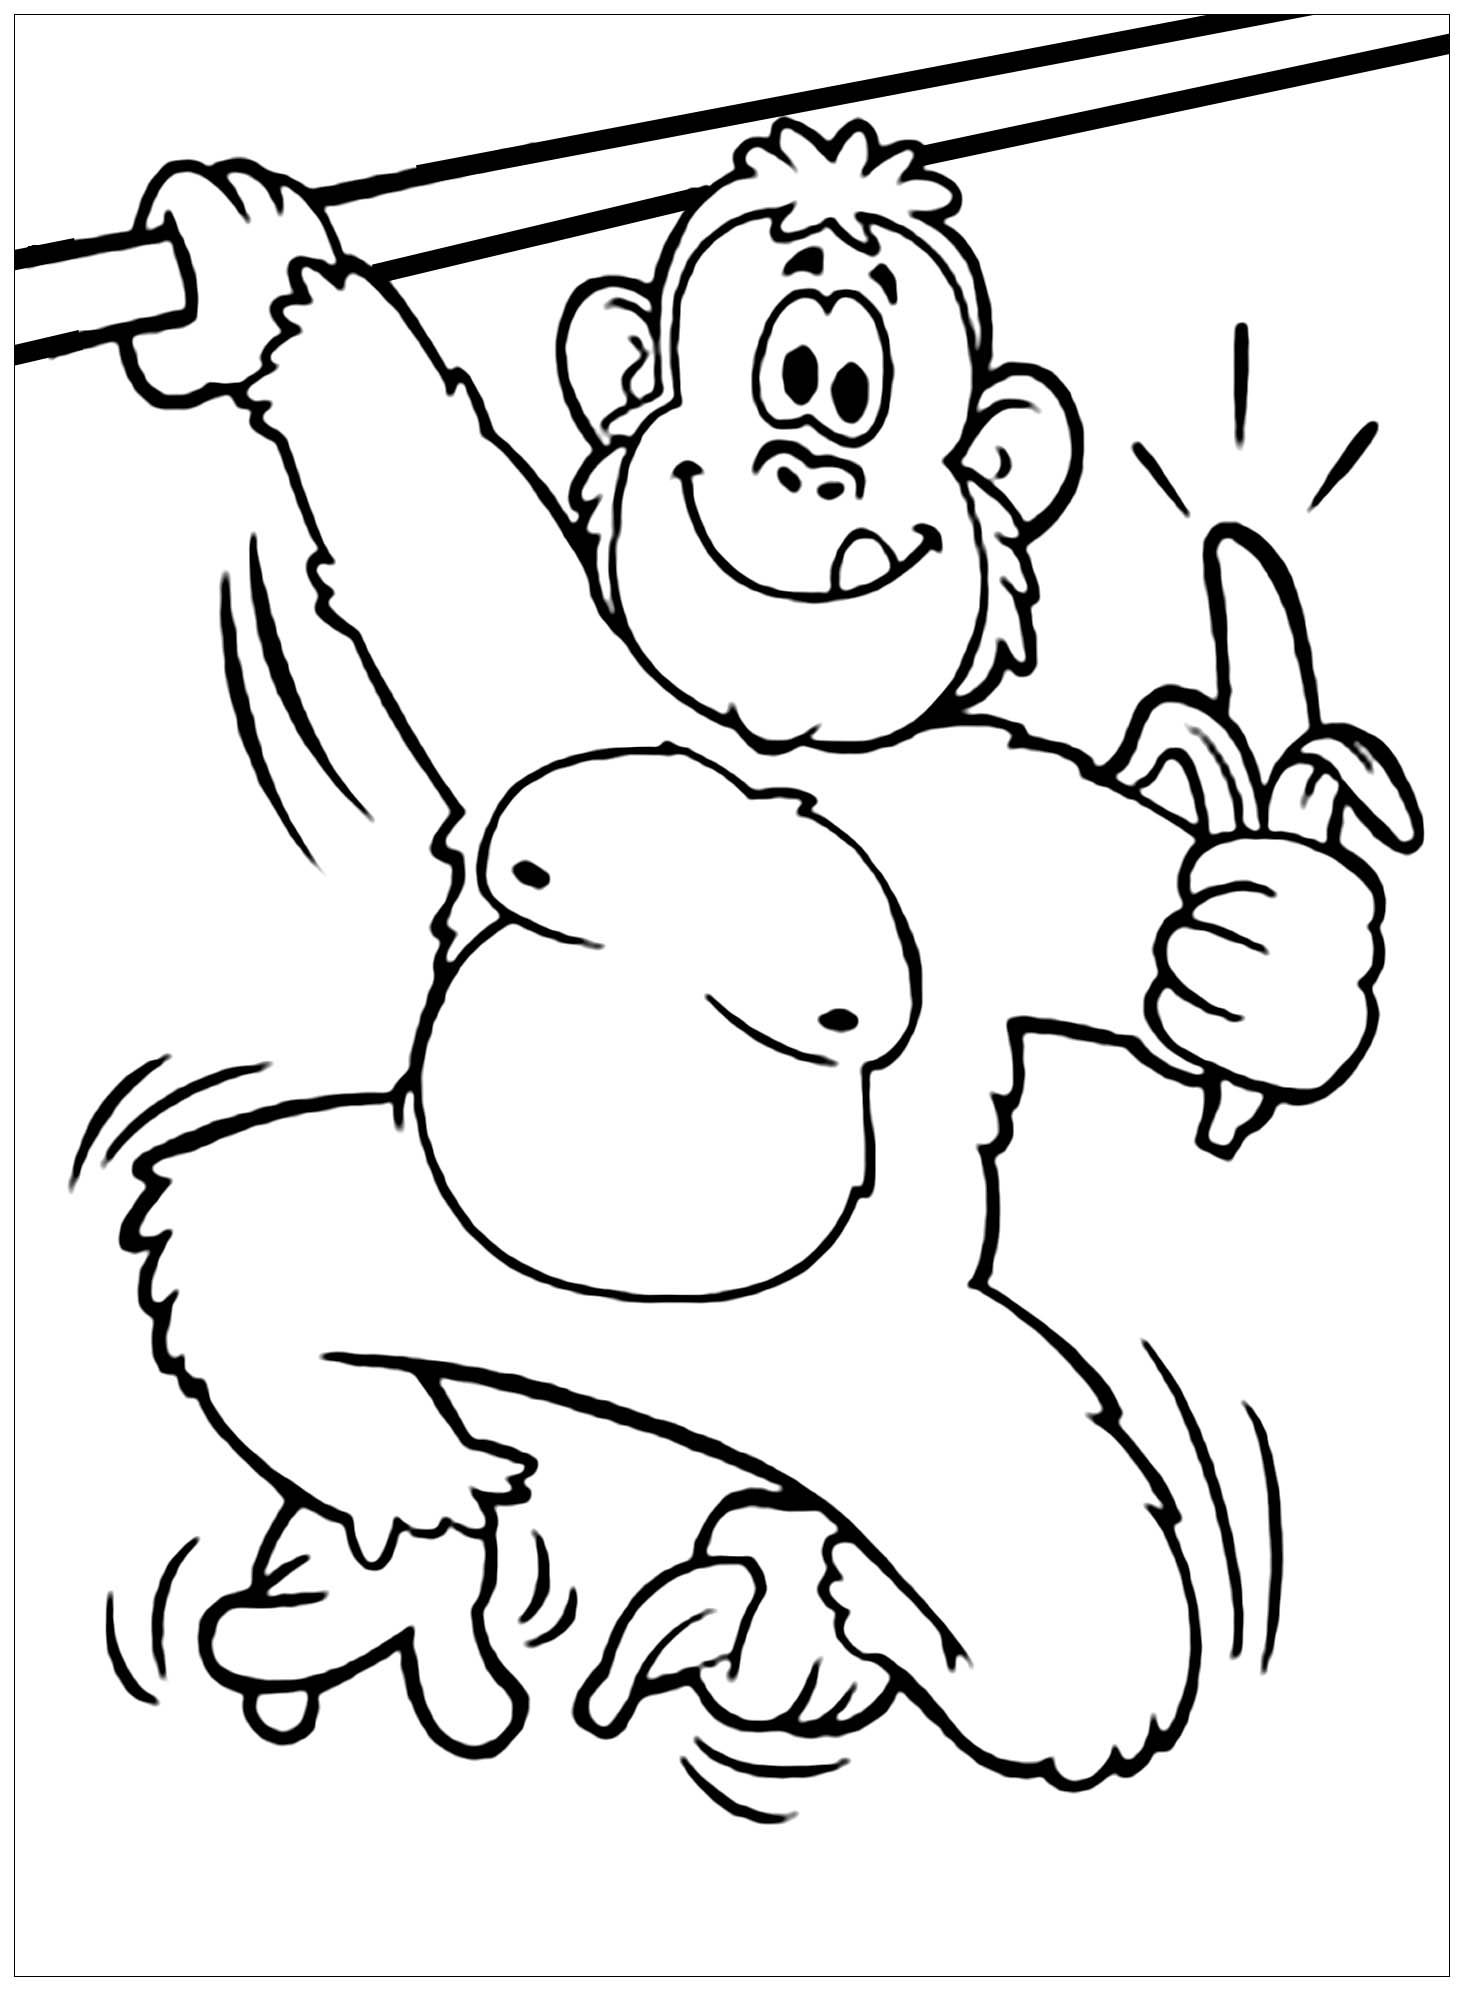 Beautiful Monkeys coloring page to print and color